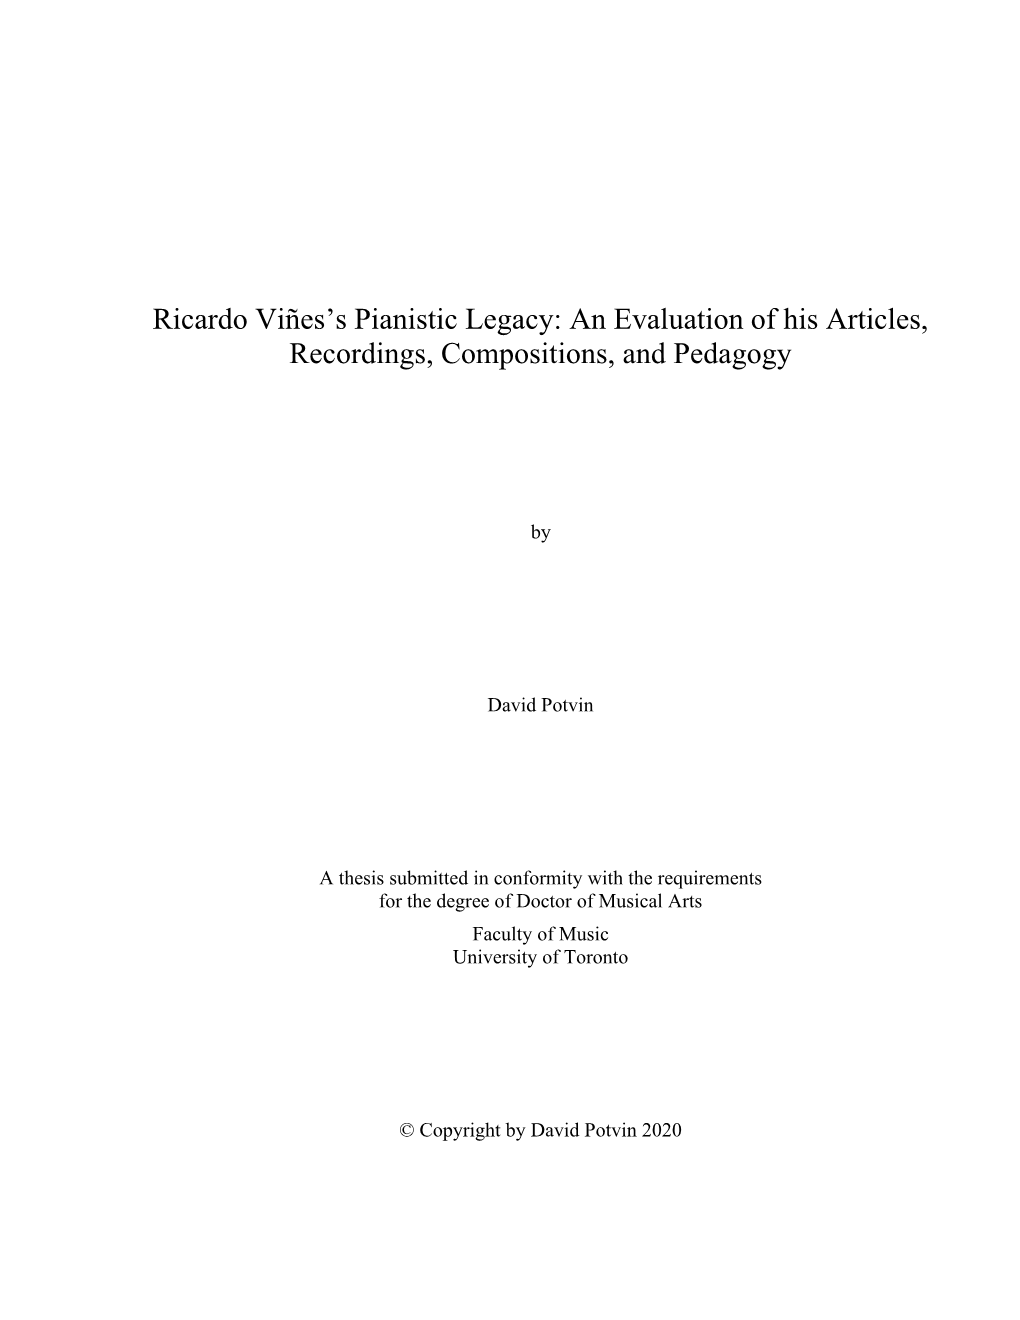 Ricardo Viñes's Pianistic Legacy: an Evaluation of His Articles